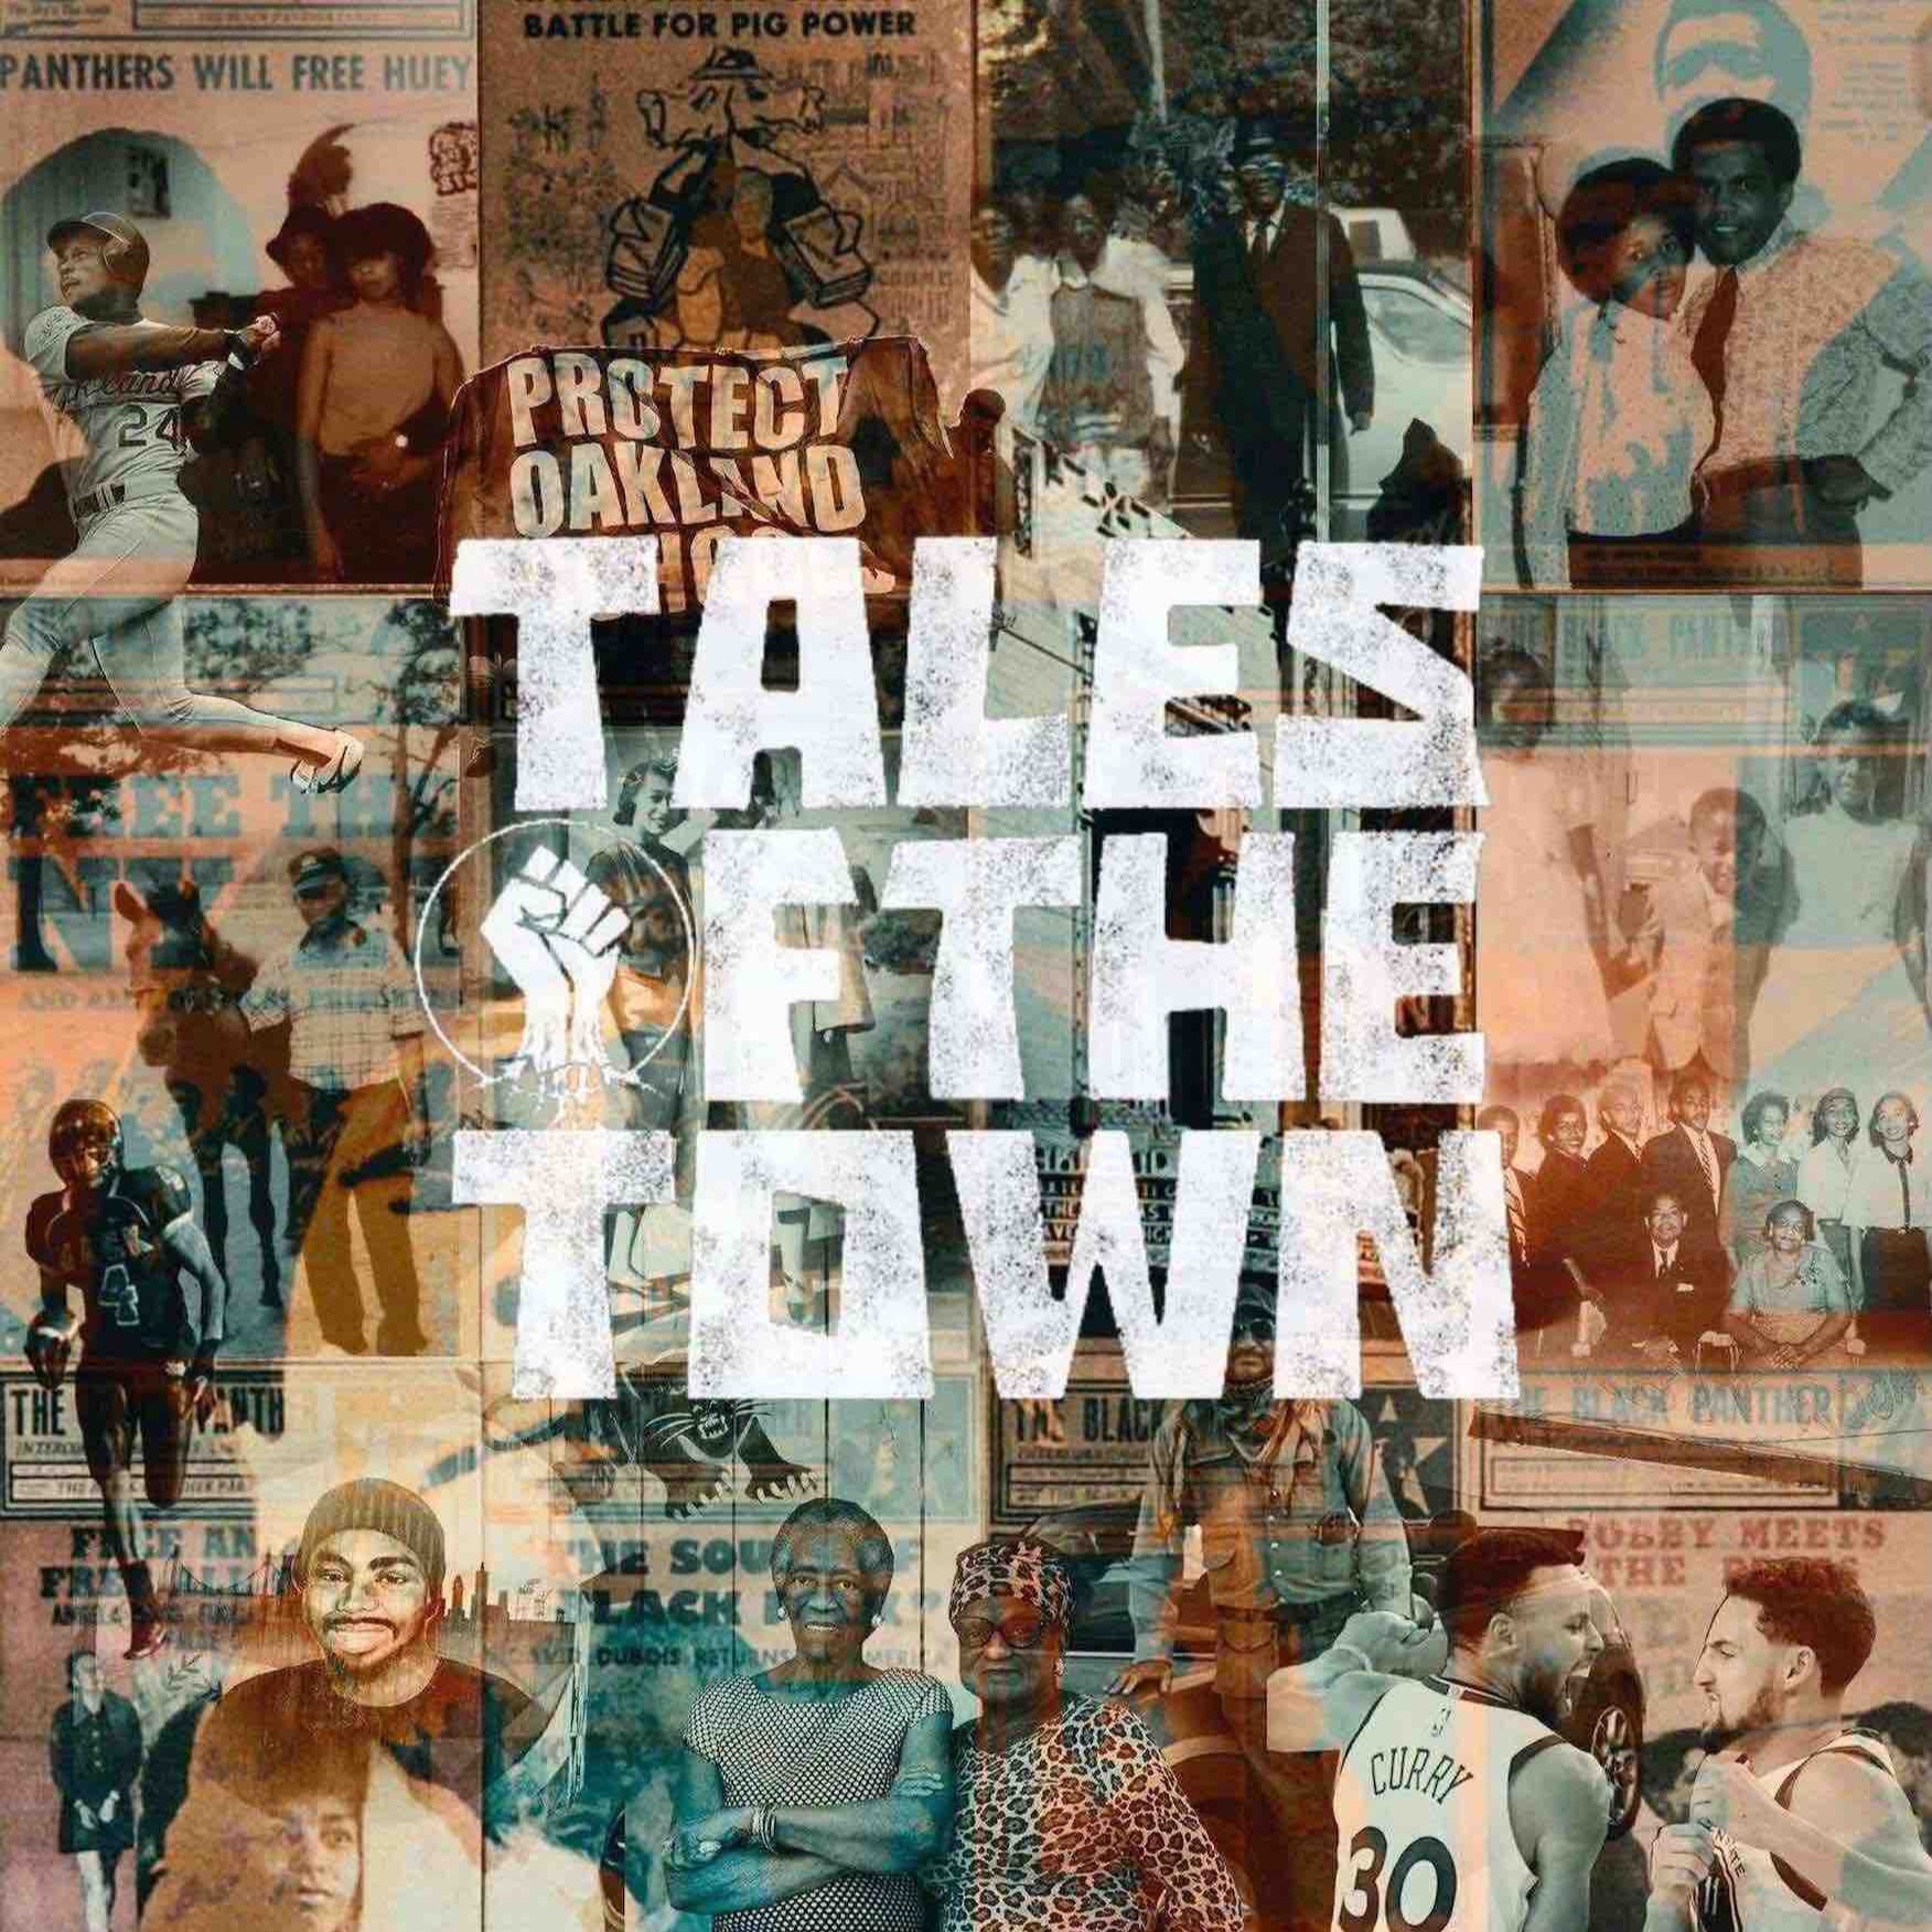 Tales of The Town E2: The Black Panther Party & People’s Breakfast Oakland